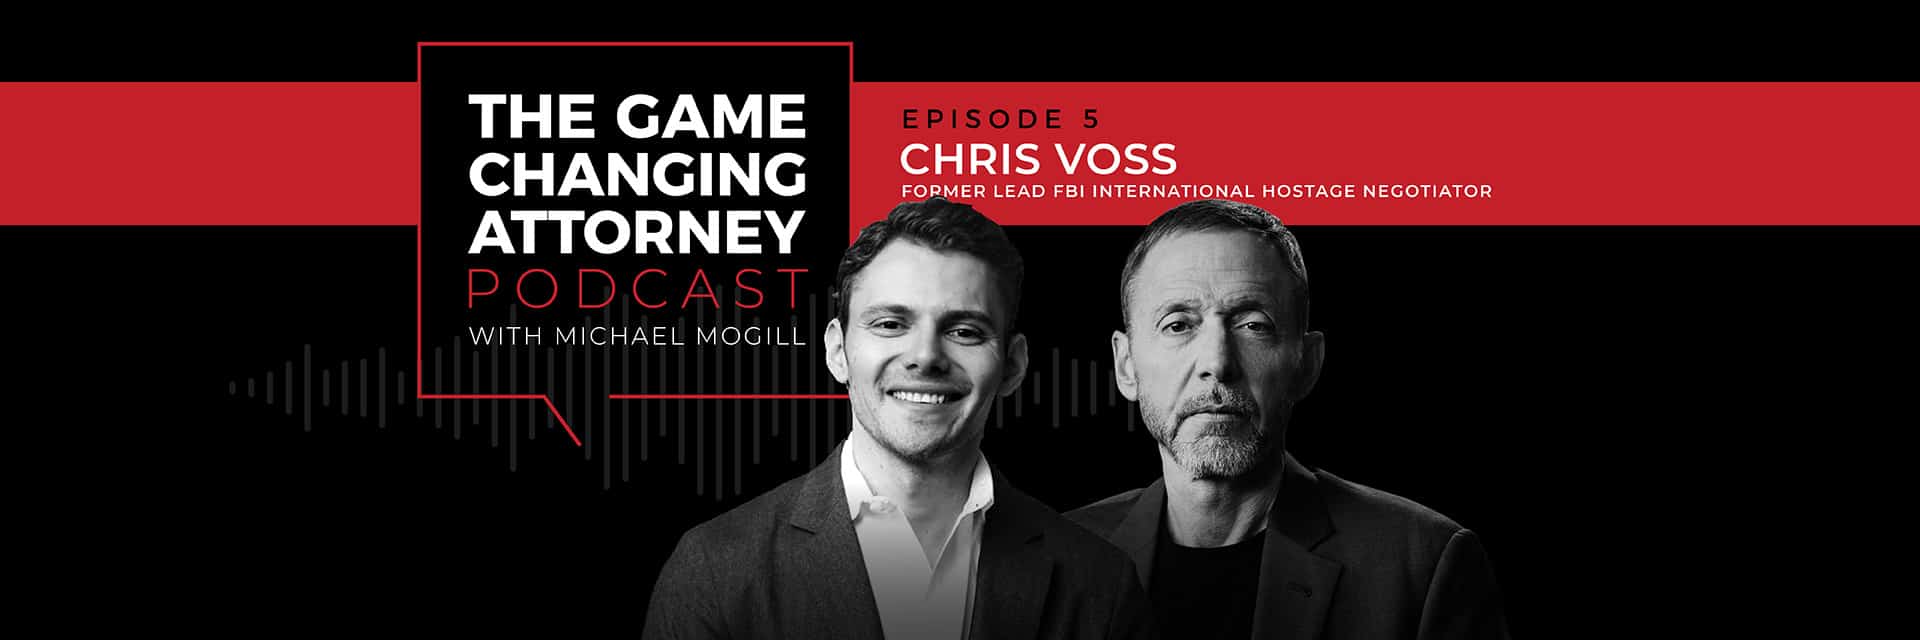 Chris Voss on The Game Changing Attorney Podcast 2